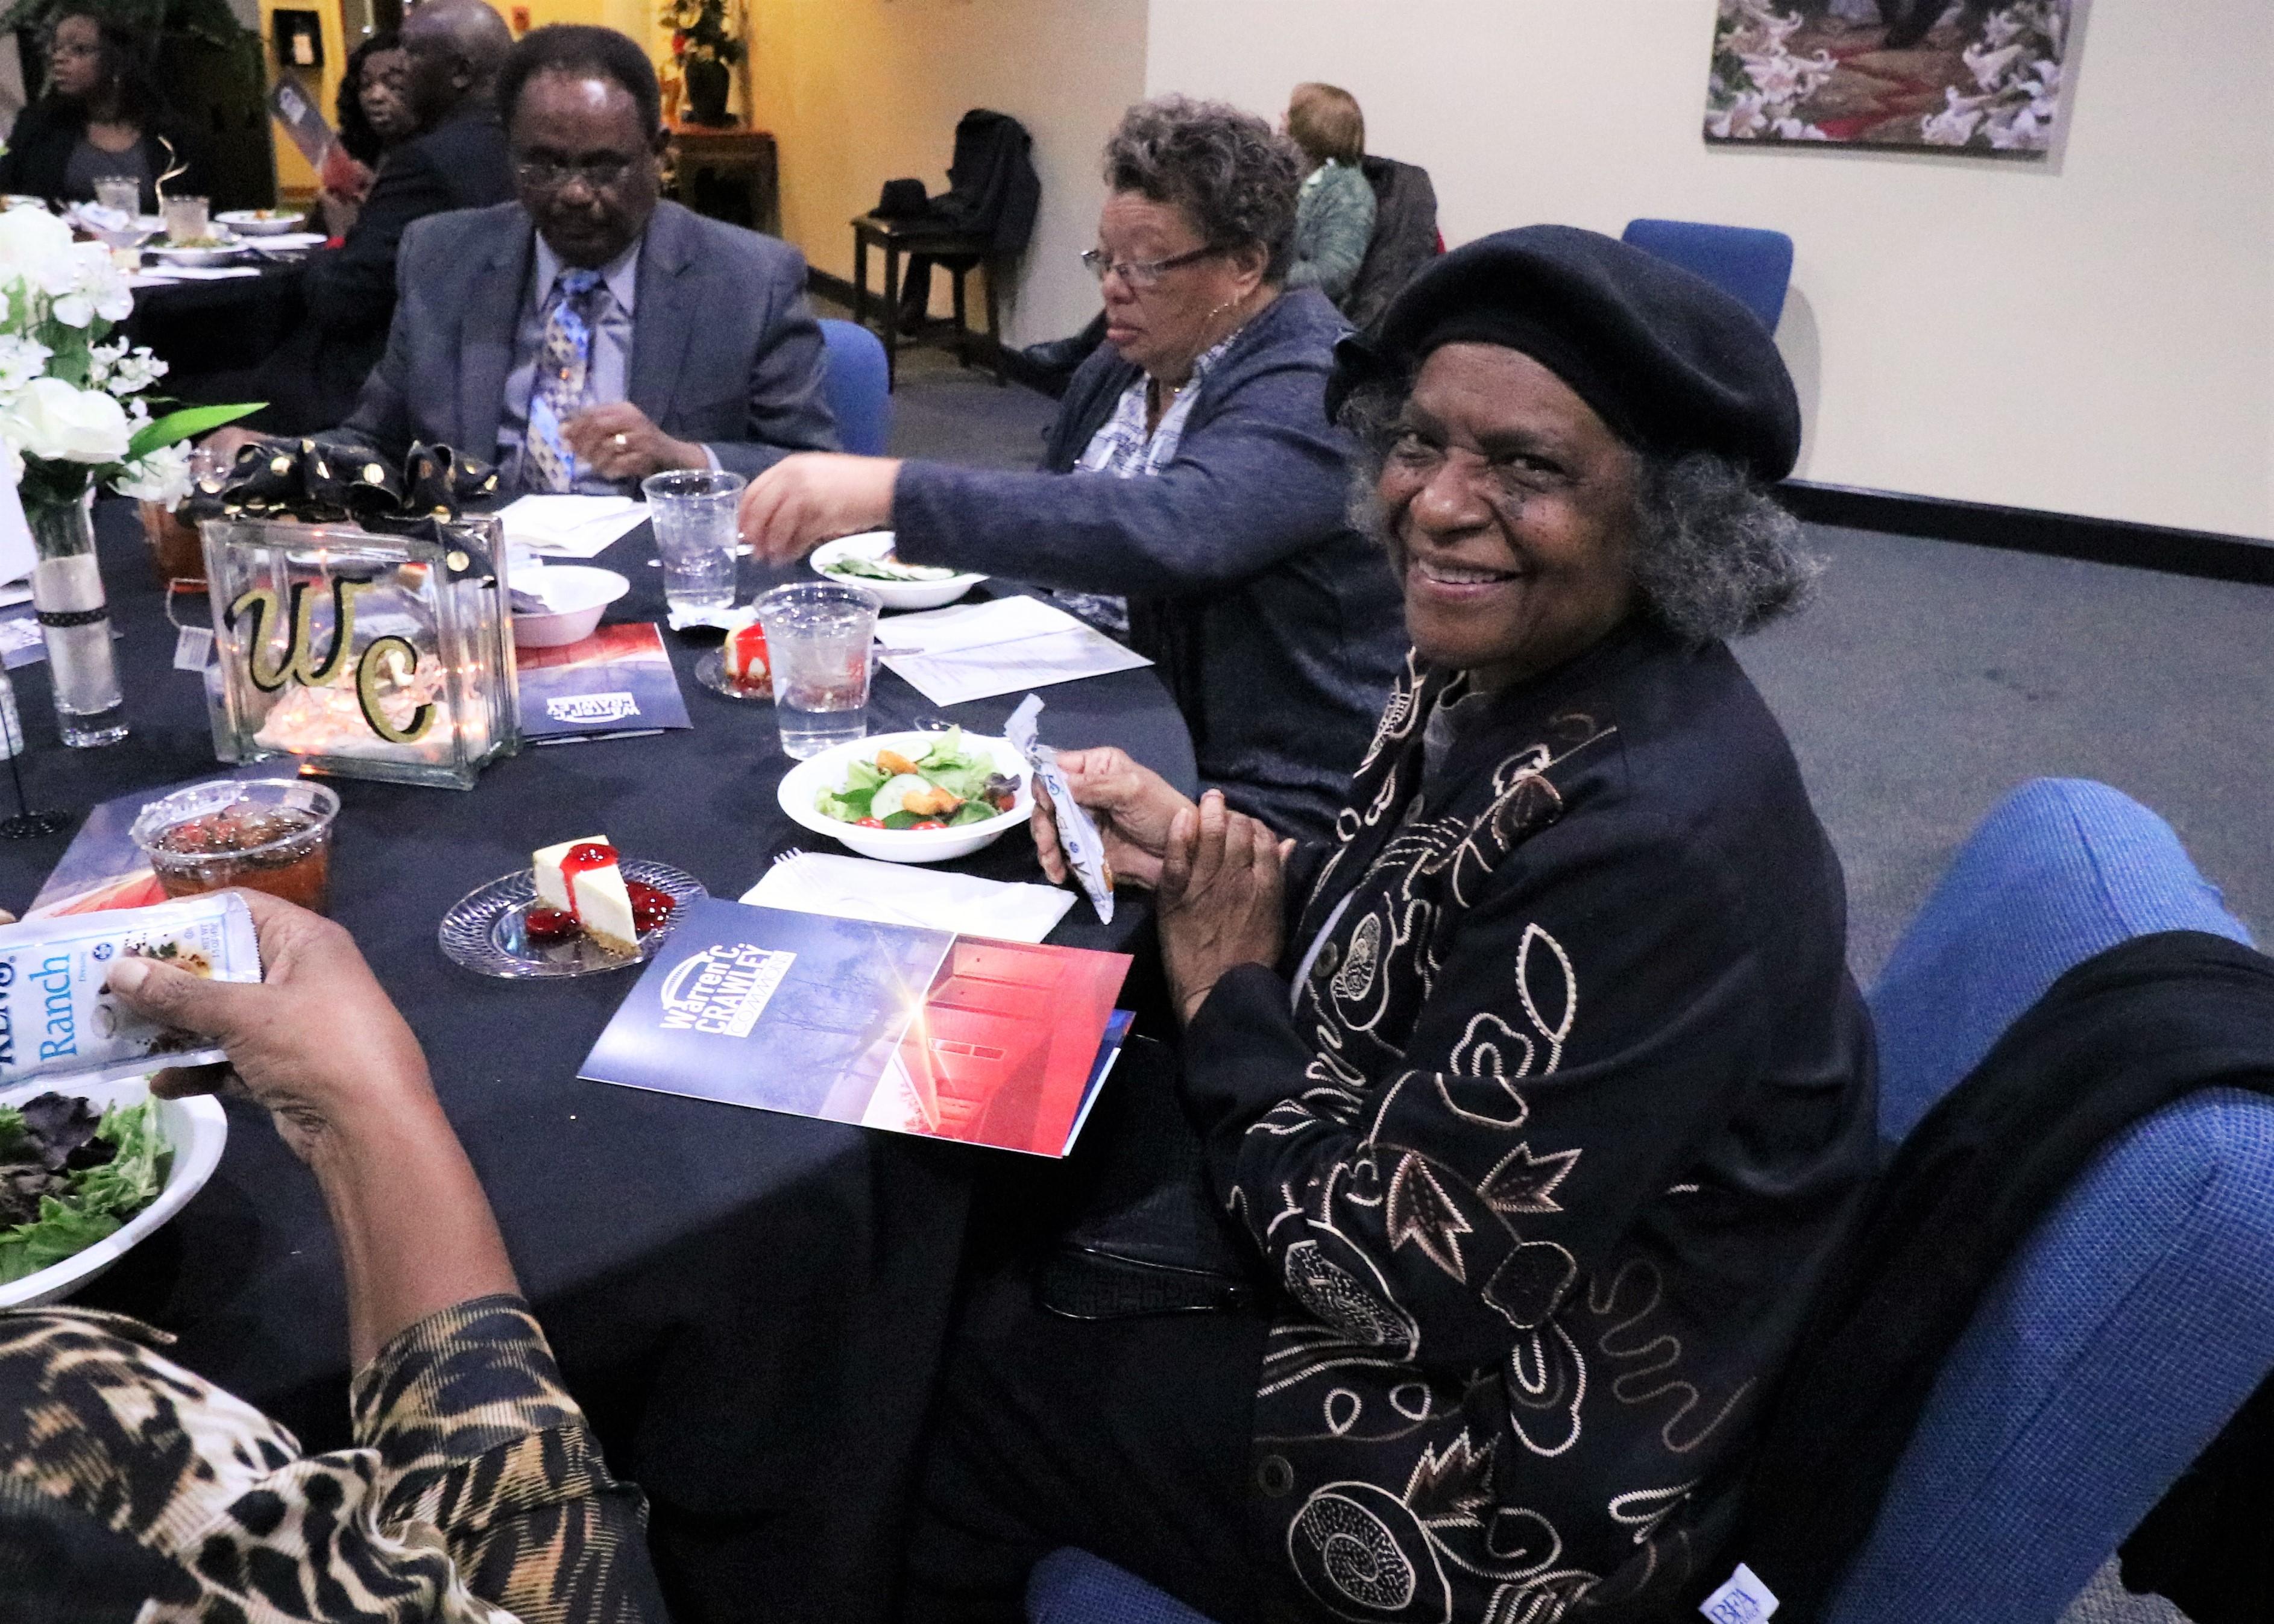 Over 275 people gathered for the Warren C. Crawley Sr. Celebration of Heritage Banquet on February 3, 2018. The desire to celebrate Crawley’s legacy united people from different races, ages, and even geographical locations.